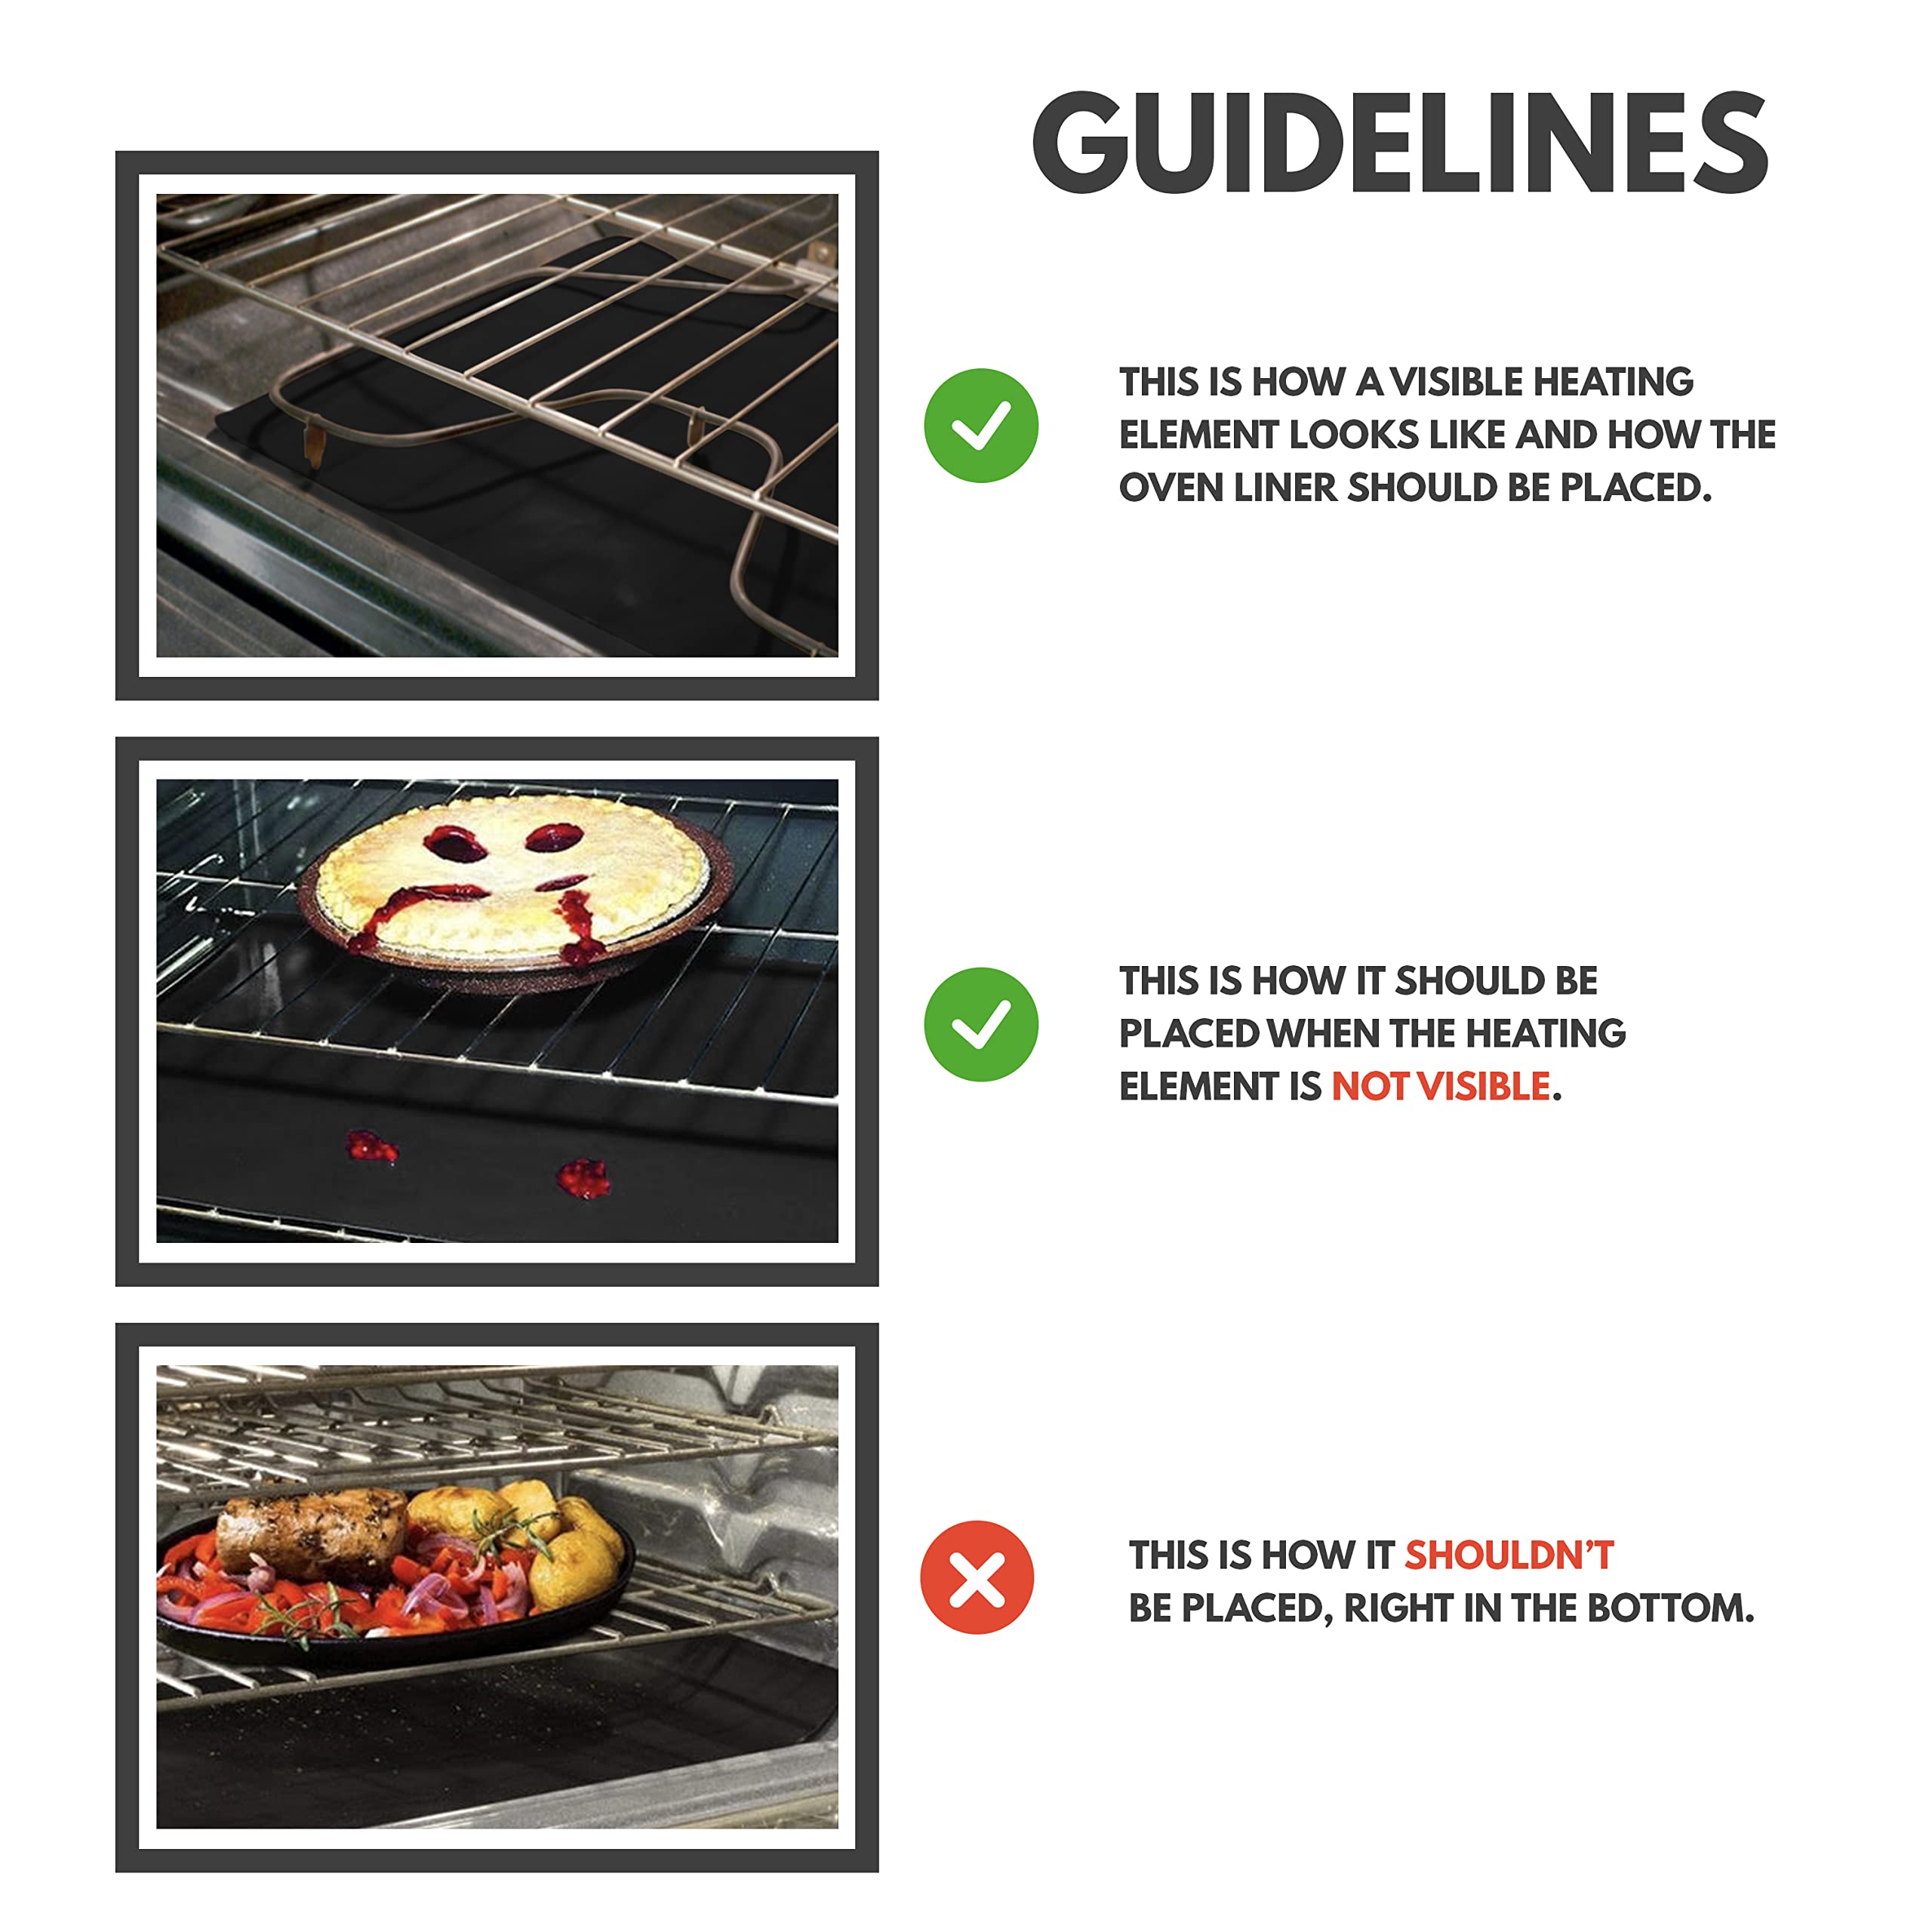 Cooks Innovations Non-Stick Oven Protector Mat - Heavy Duty Nonstick Oven Rack Liners to Protect Convection, Electric, Gas, & Microwave Ovens - BPA & PFOA Free Heat Resistant Baking Mat